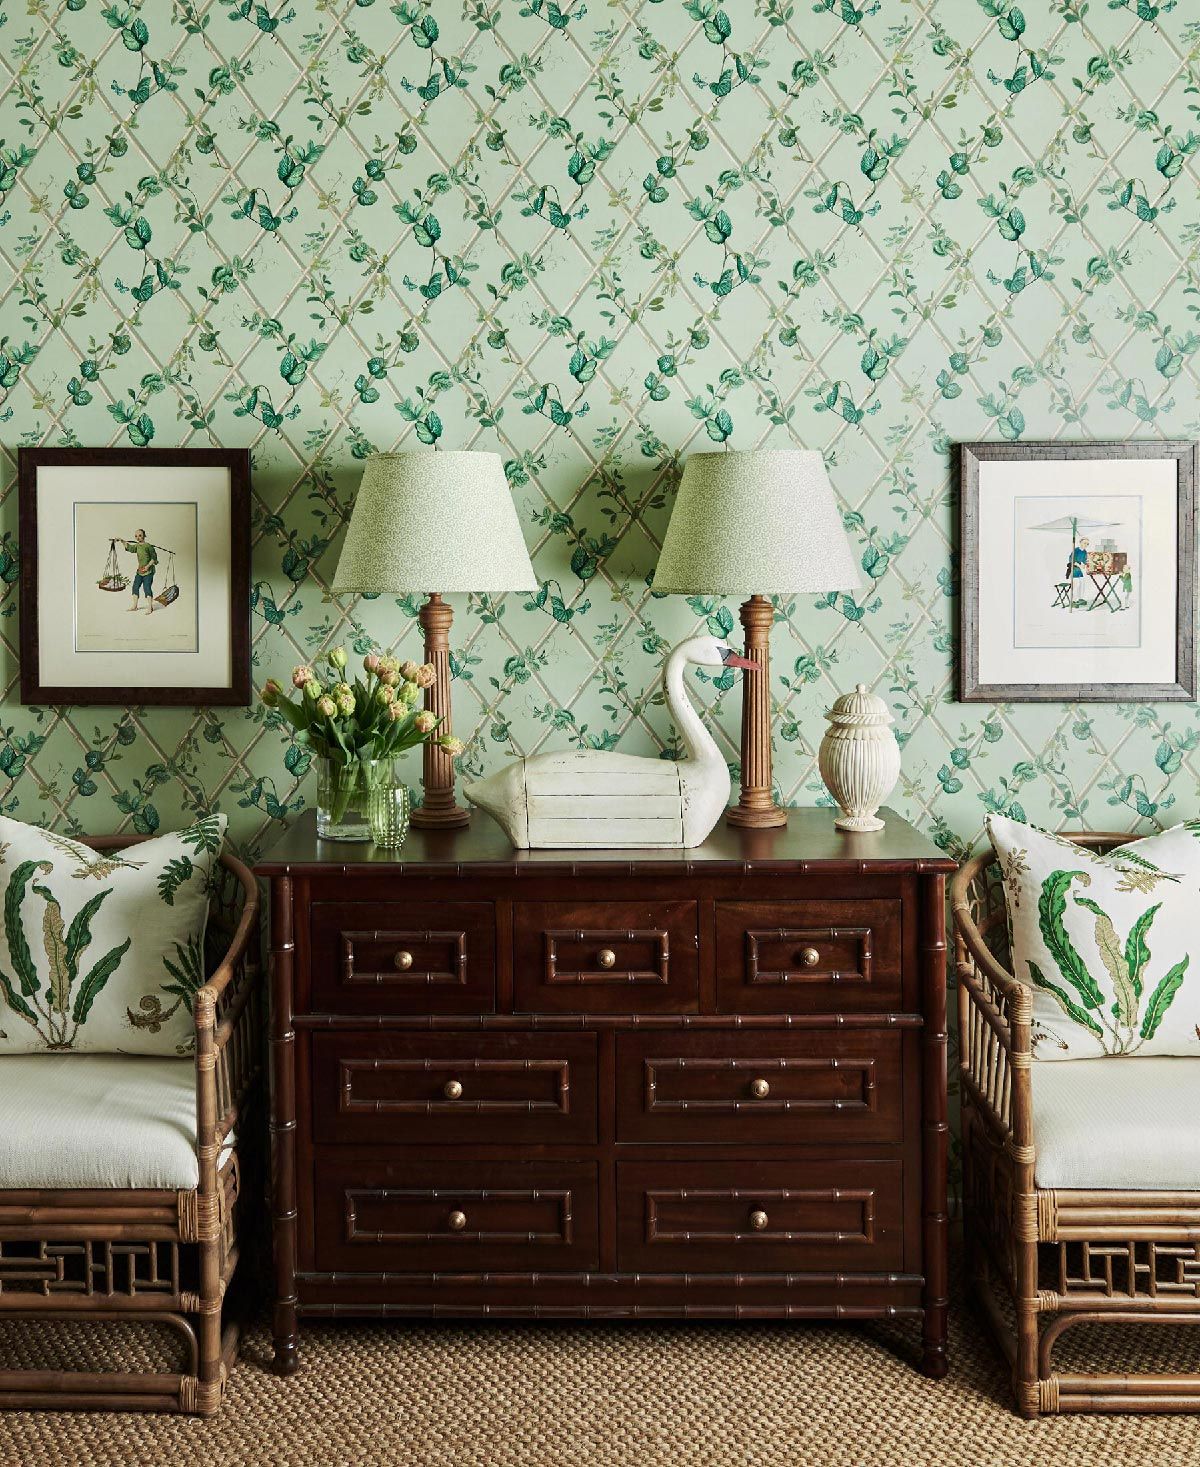 Maine House Interiors: Wallpaper Collection